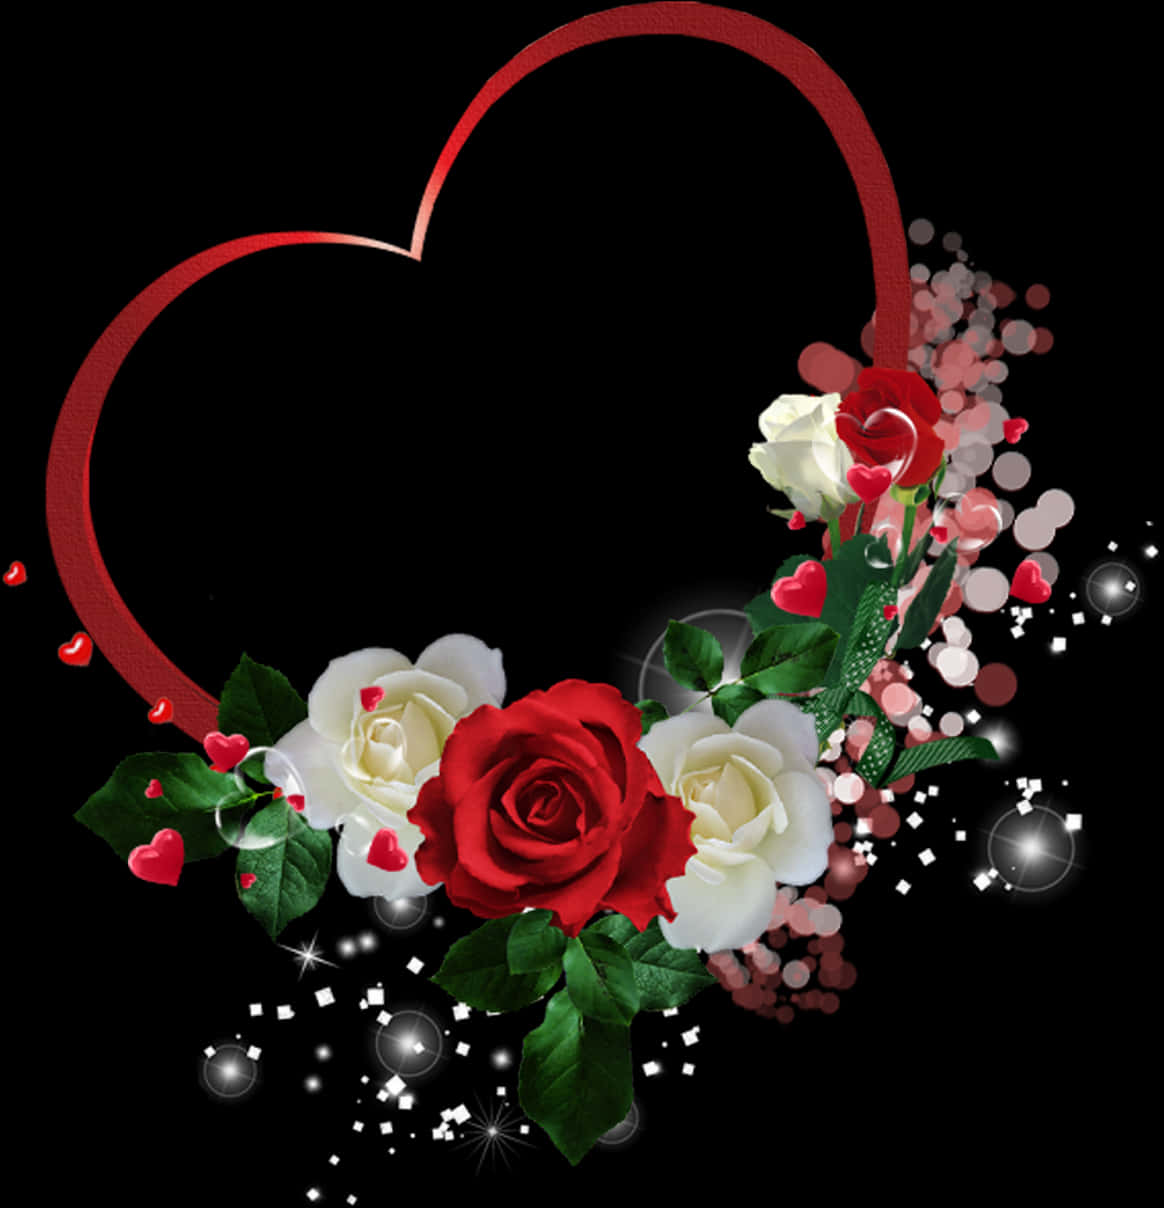 Romantic Heartand Roses Graphic PNG image